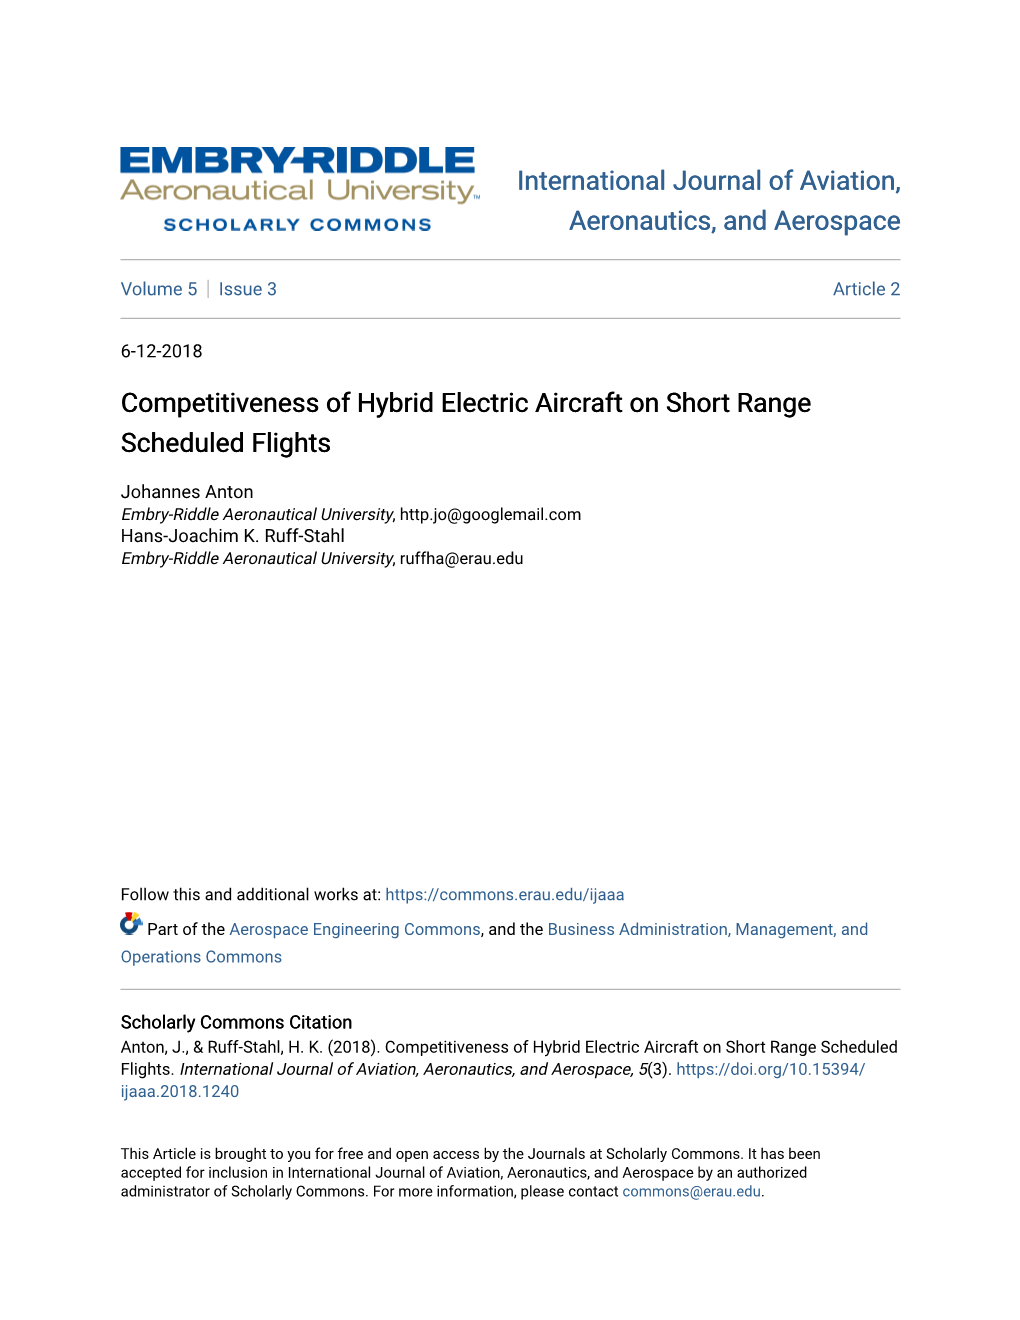 Competitiveness of Hybrid Electric Aircraft on Short Range Scheduled Flights